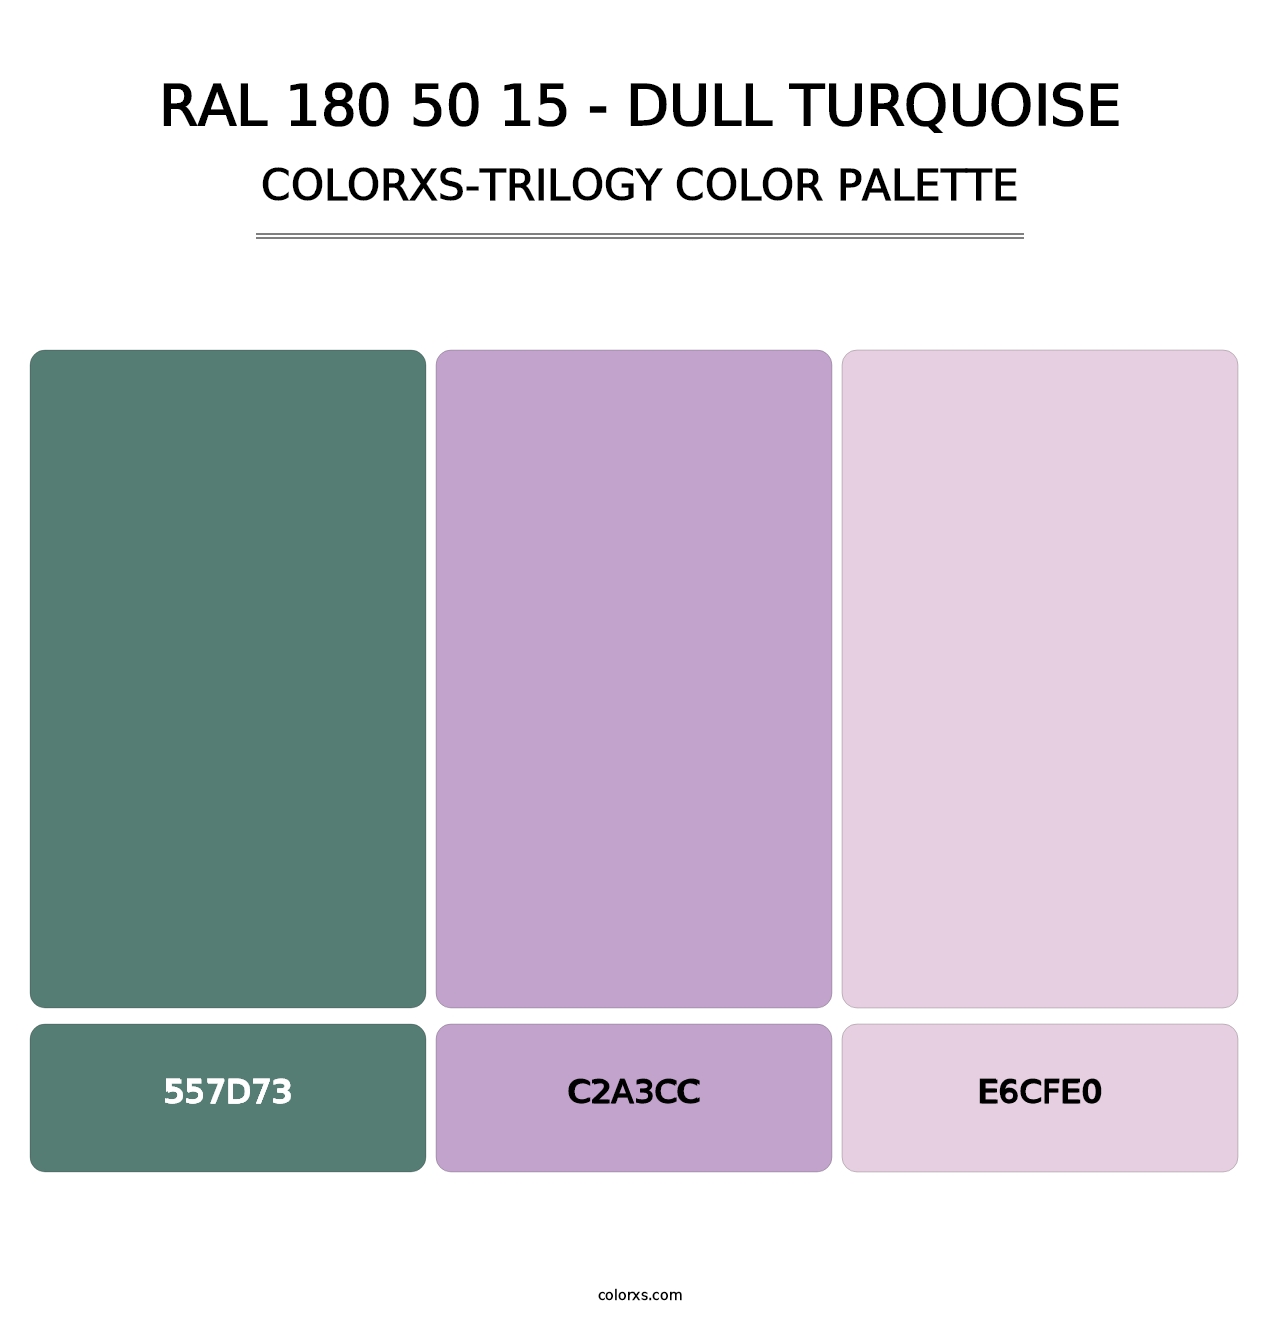 RAL 180 50 15 - Dull Turquoise - Colorxs Trilogy Palette